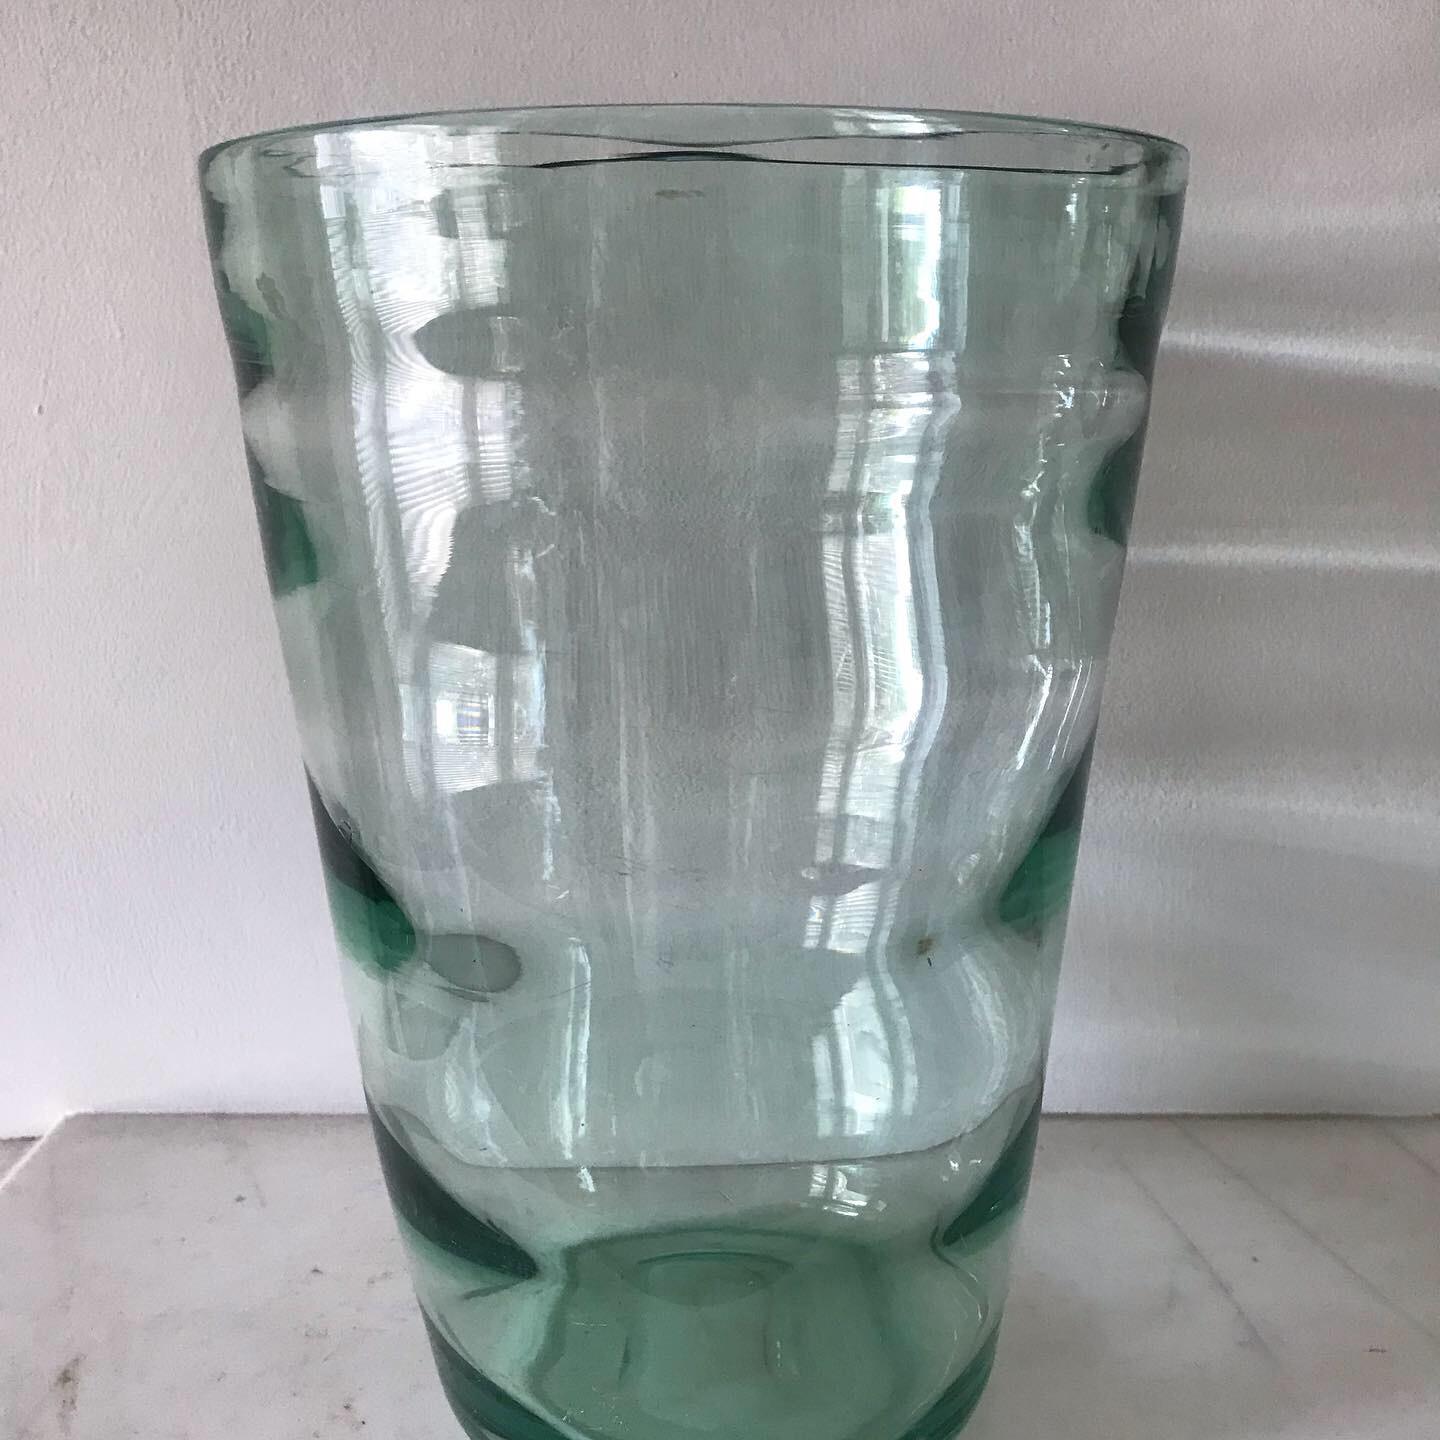 A lovely example of a sea green optical whitefriars vase. Probably designed by either James Hogan or William Wilson. These type of vases stopped being produced by 1957. Heavy handblown with a clever optical effect.